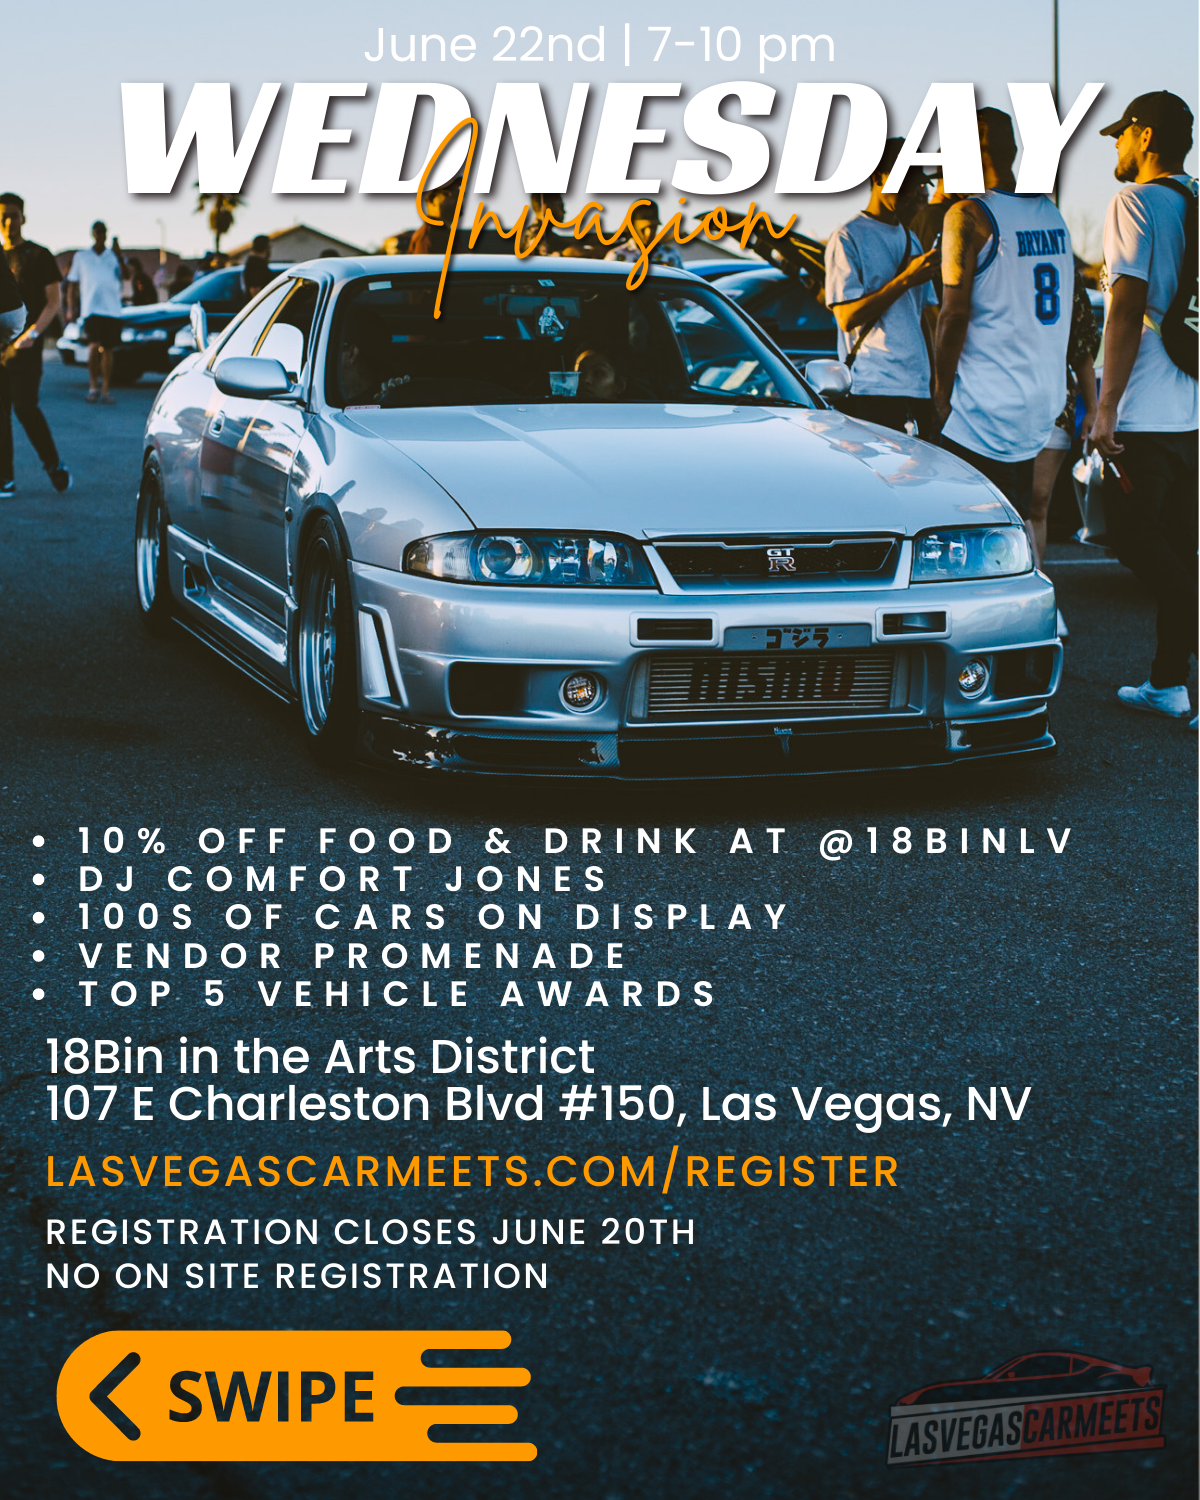 Wednesday Invasion in the Arts District June 22nd, 2022 – Register now!